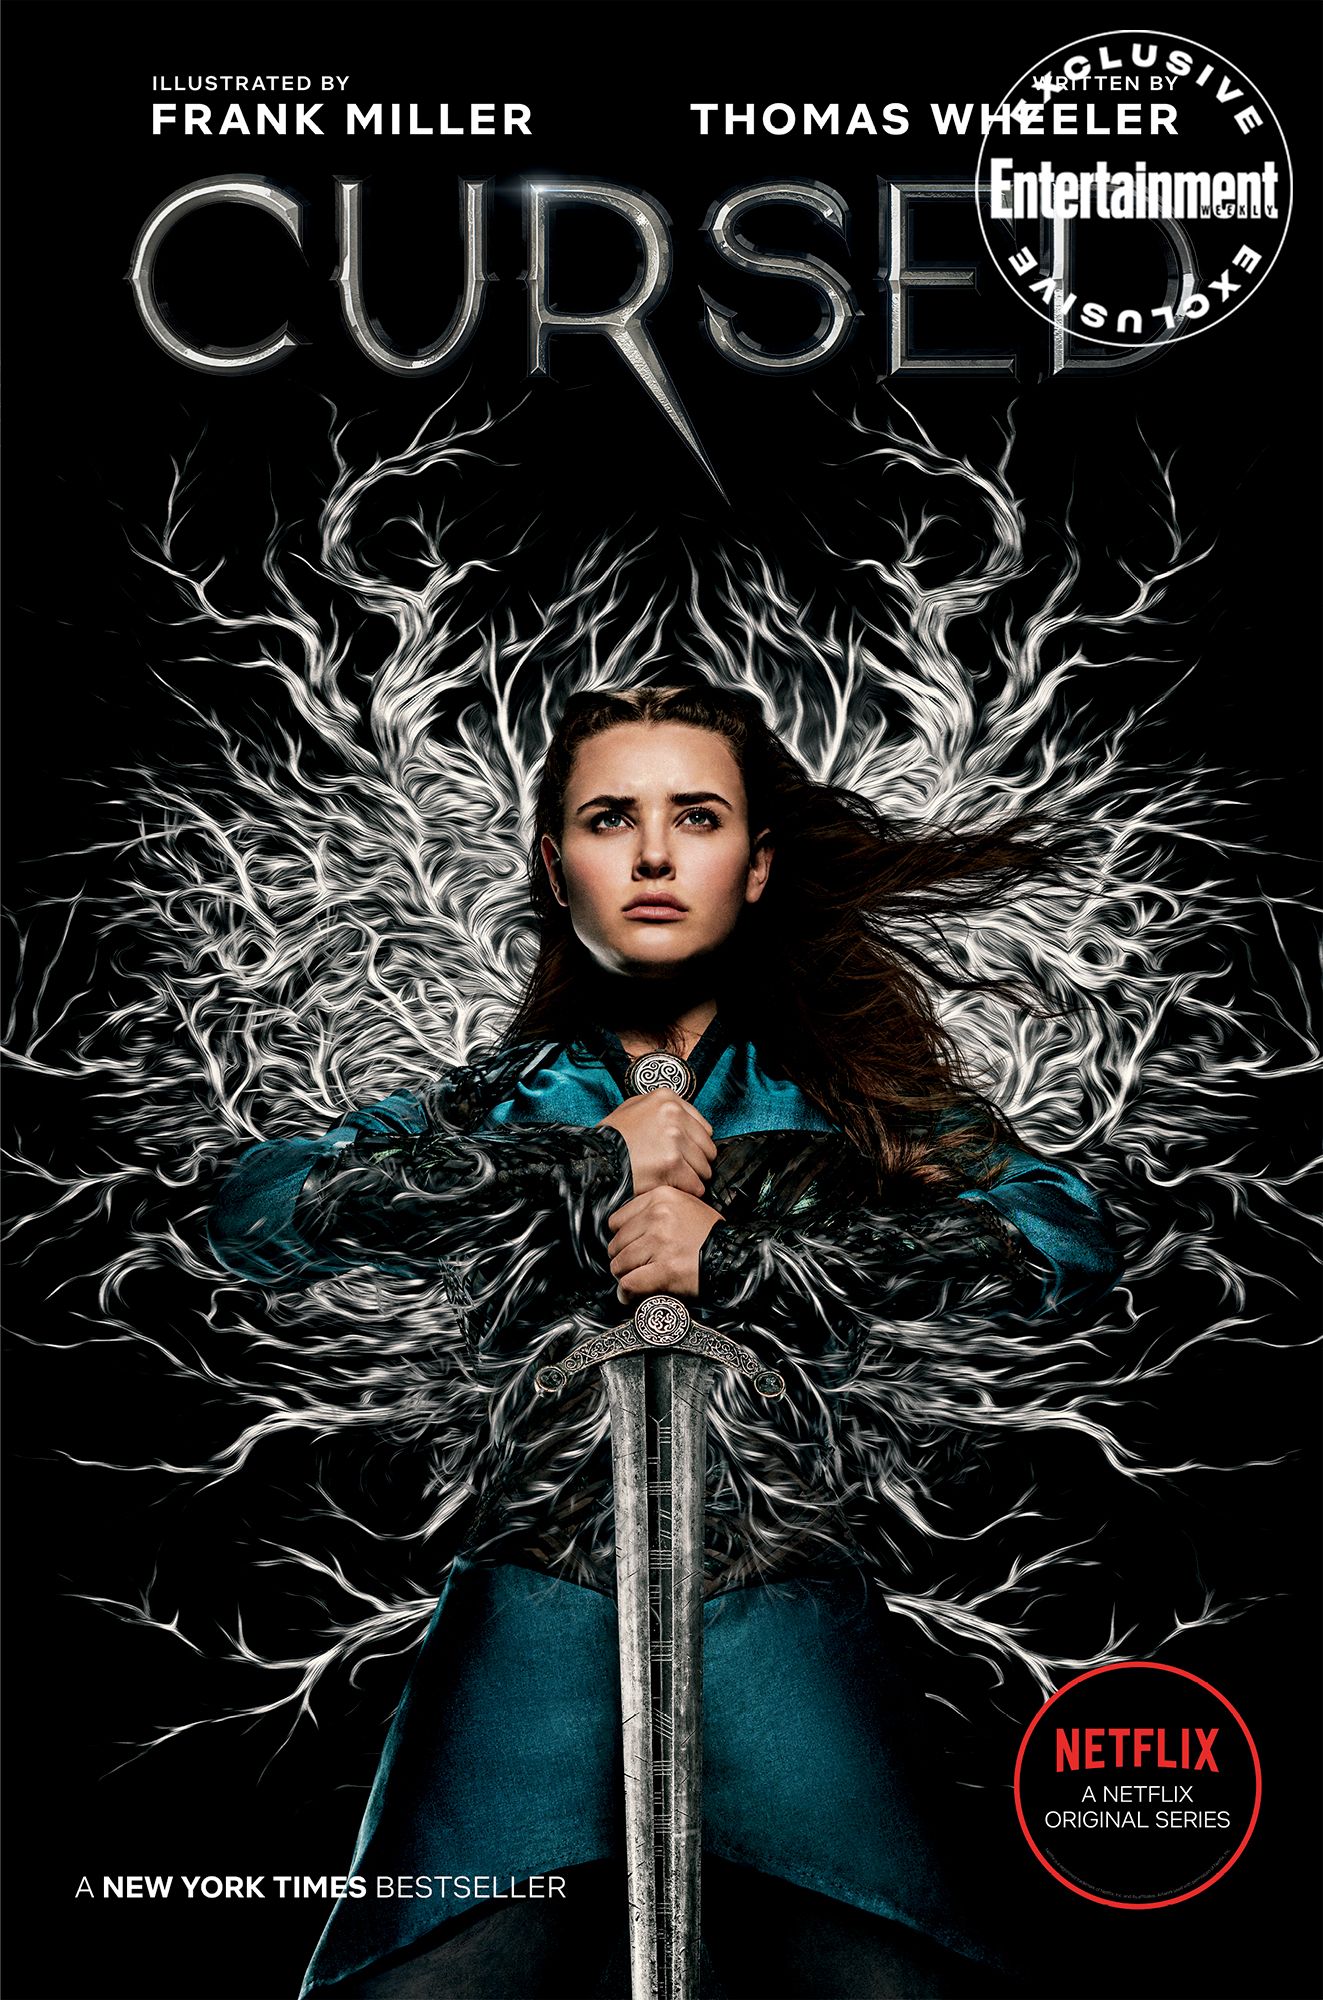 See Katherine Langford wield Excalibur in exclusive preview image